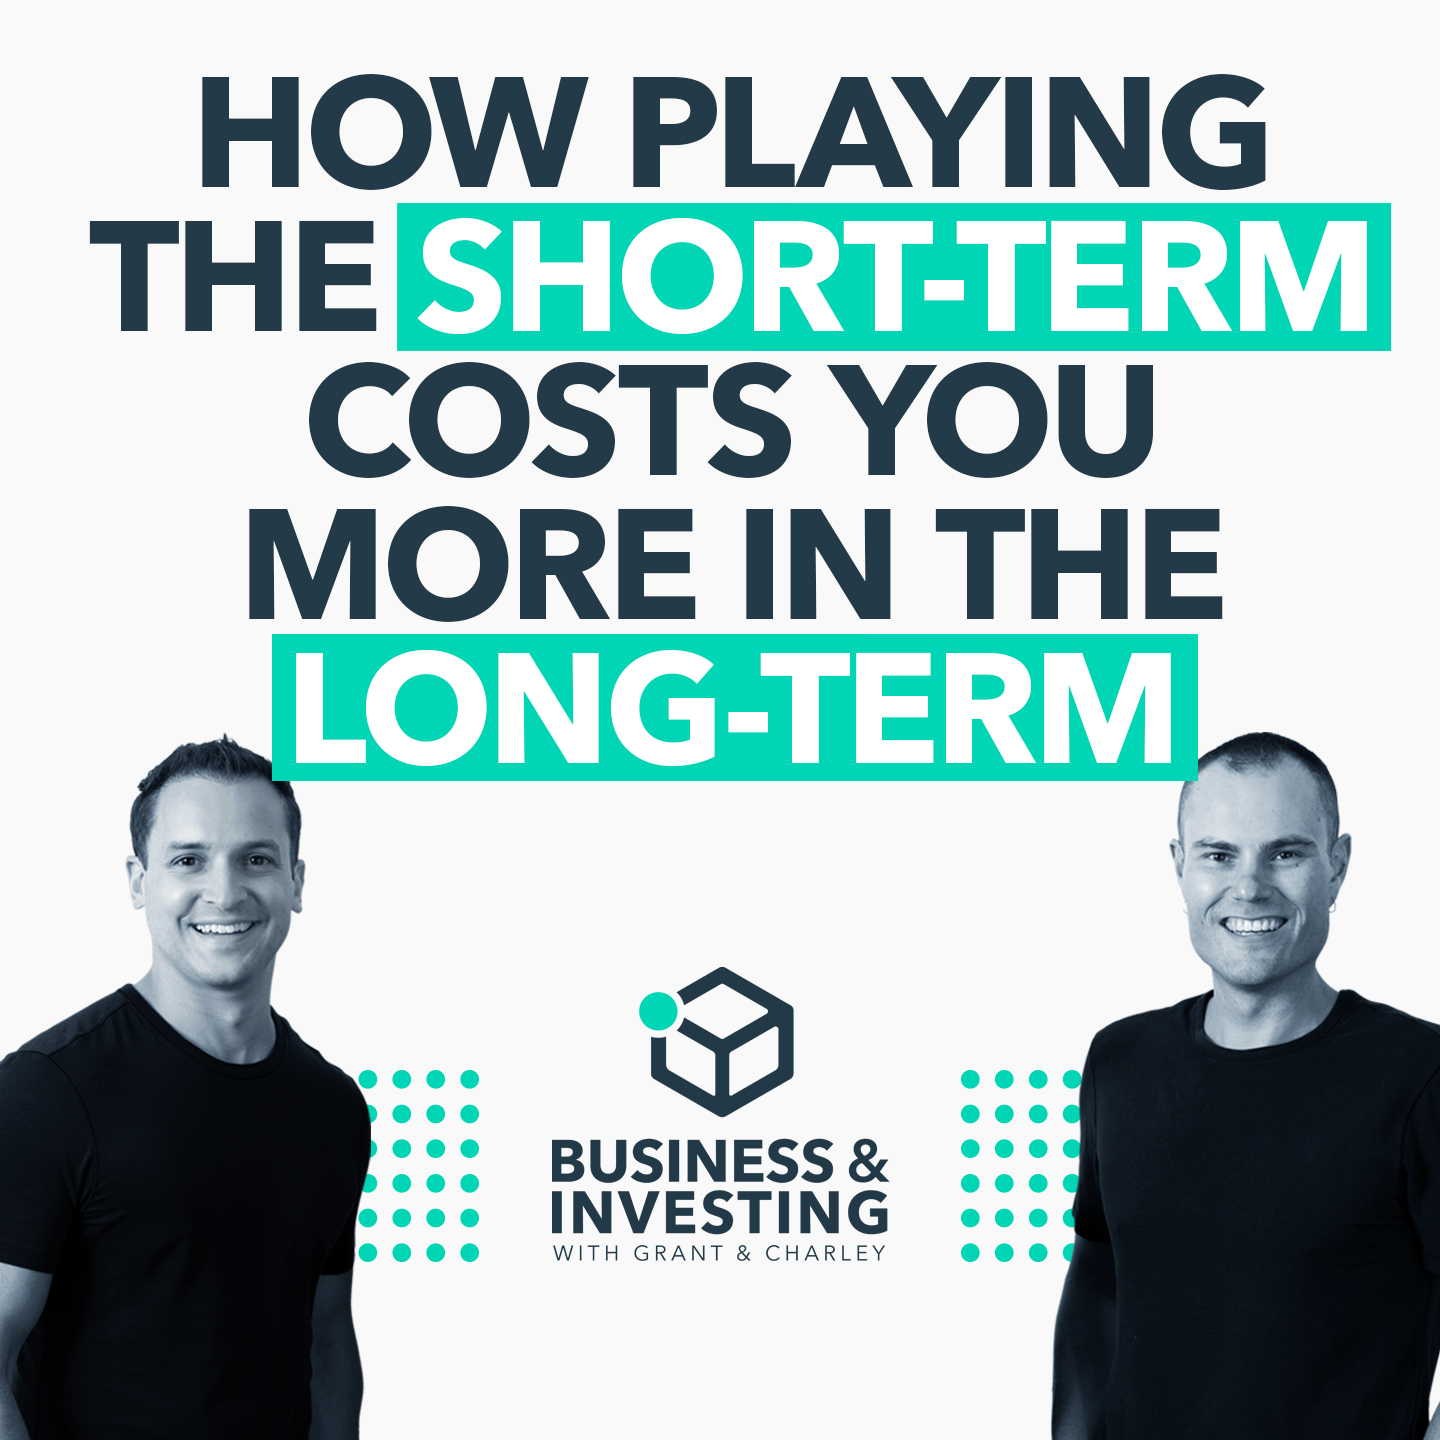 How Playing the Short-Term Costs You More in the Long-Term